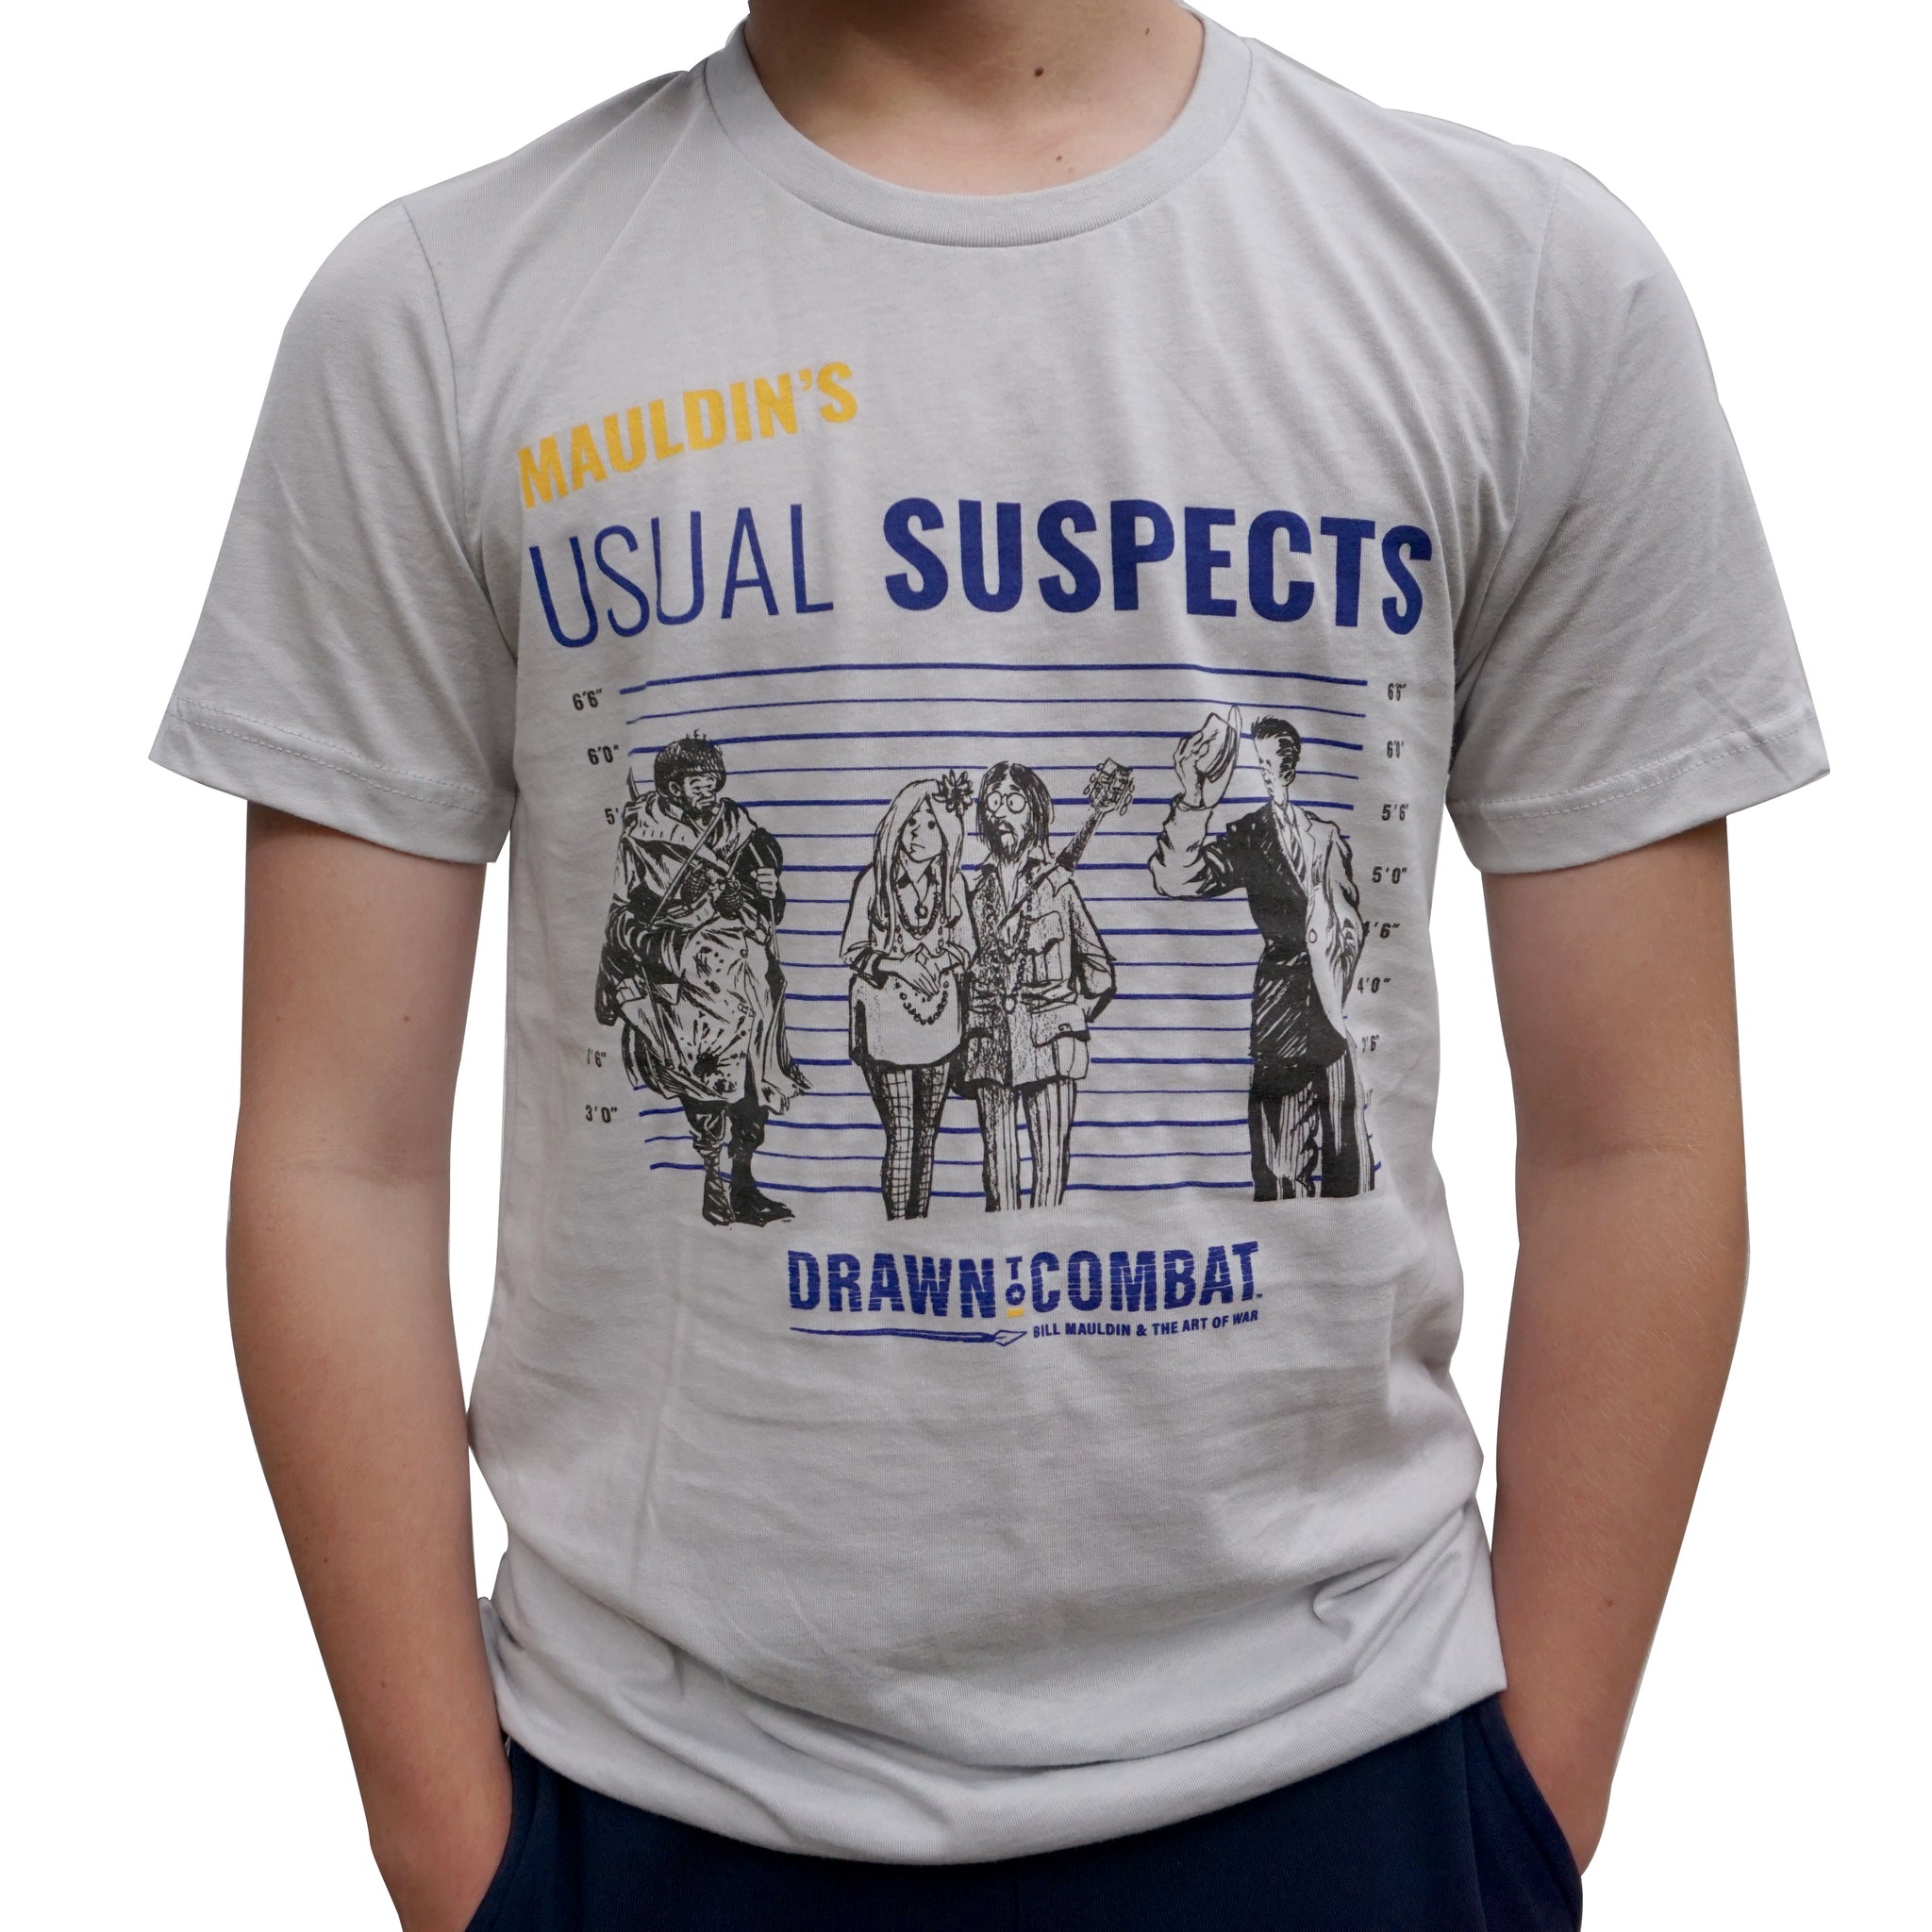 Usual Suspects T-Shirt